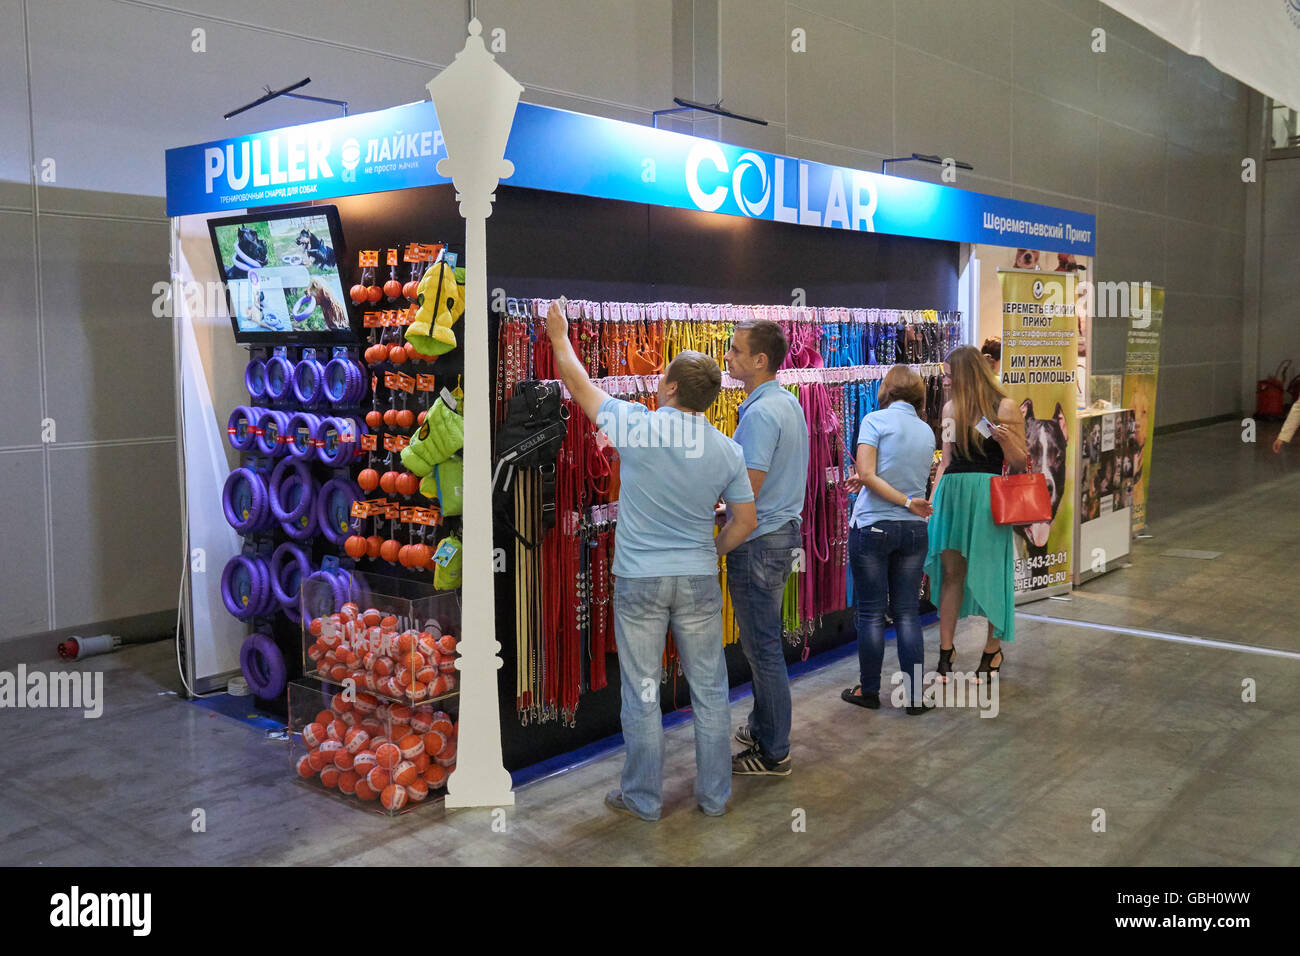 Moscow, Russia - June 24, 2016: Dog collars and toys booth at World Dog Show in Crocus Expo. Stock Photo